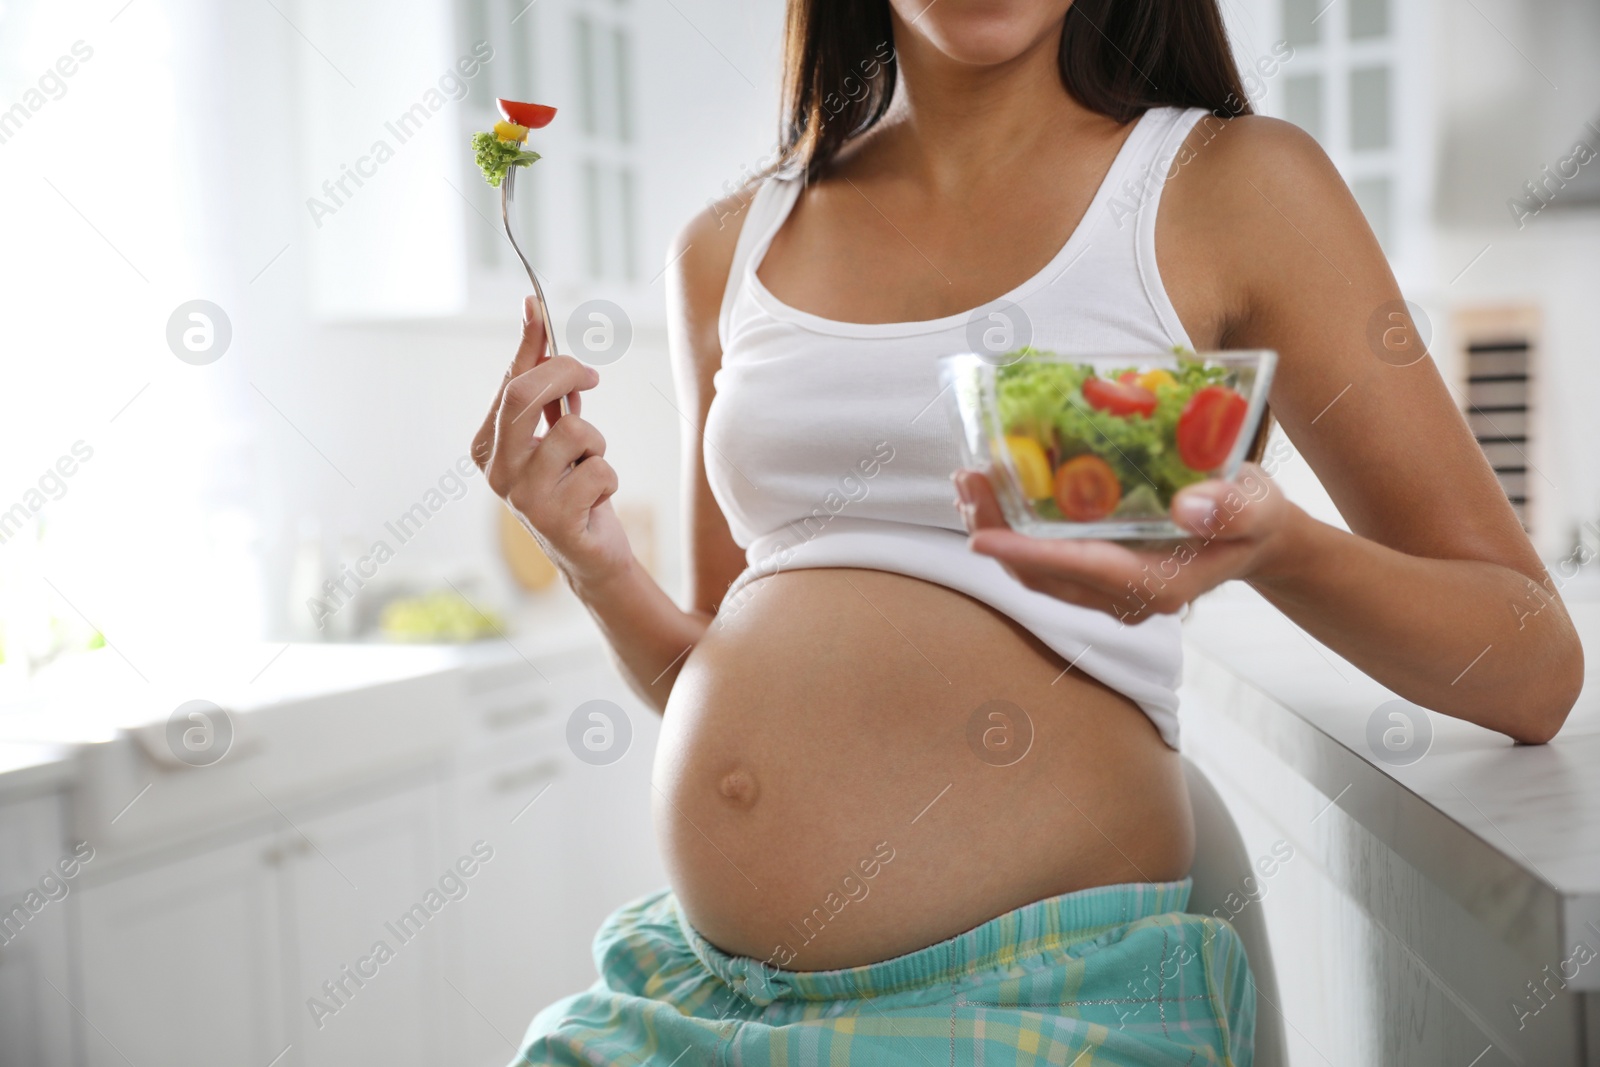 Photo of Young pregnant woman with bowl of vegetable salad at table in kitchen, closeup. Taking care of baby health